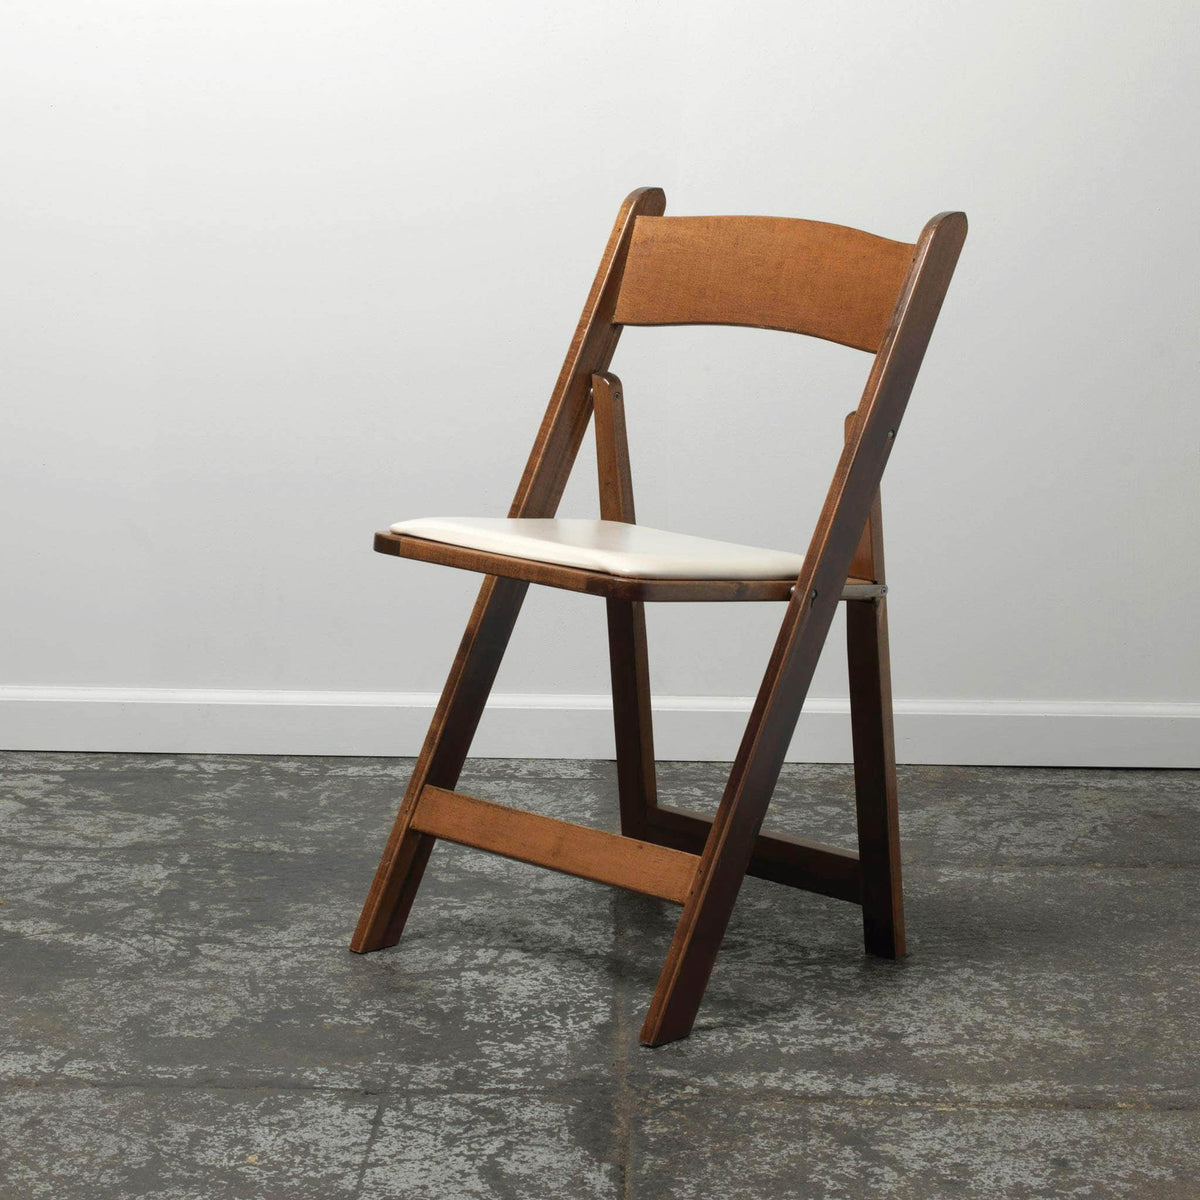 Fruitwood Wooden Folding Chair with Padded Seat